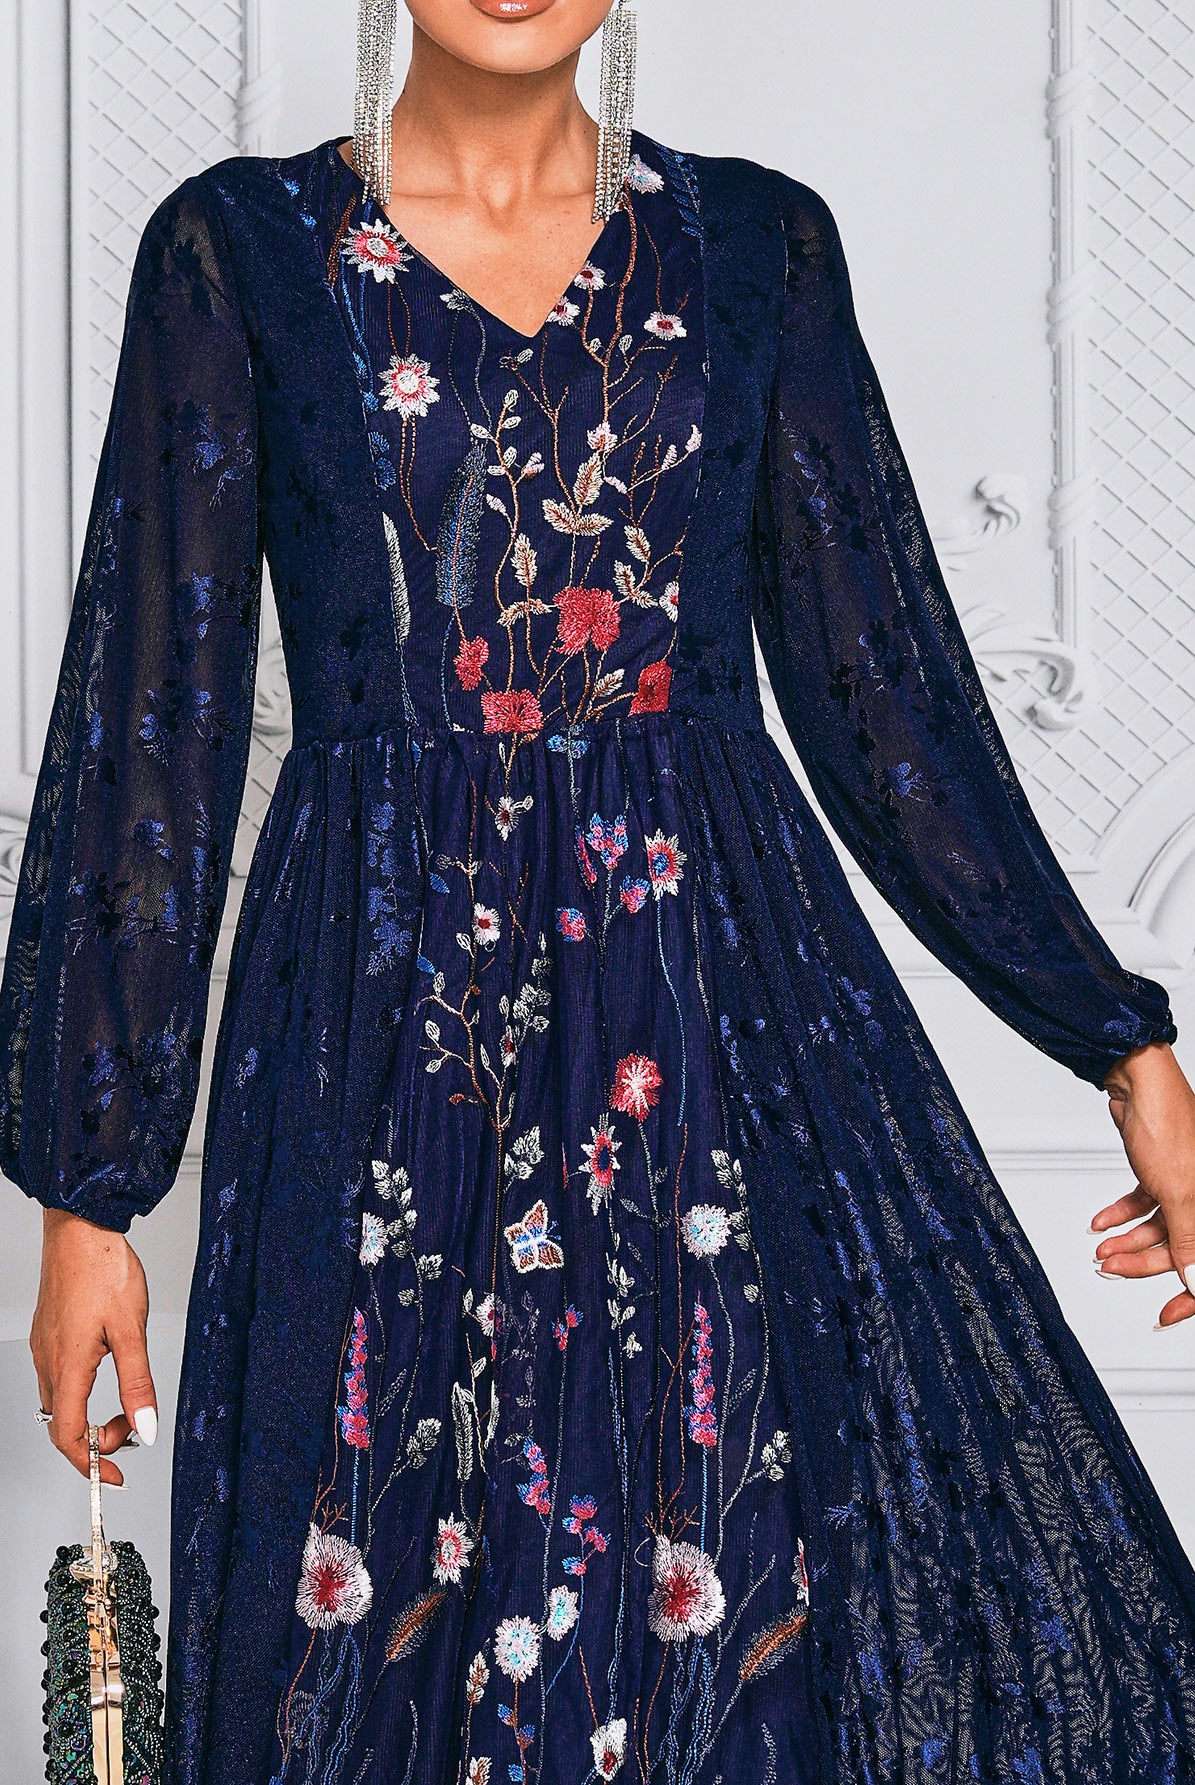 Butterfly Flower Embroidered Blue Mesh Dress